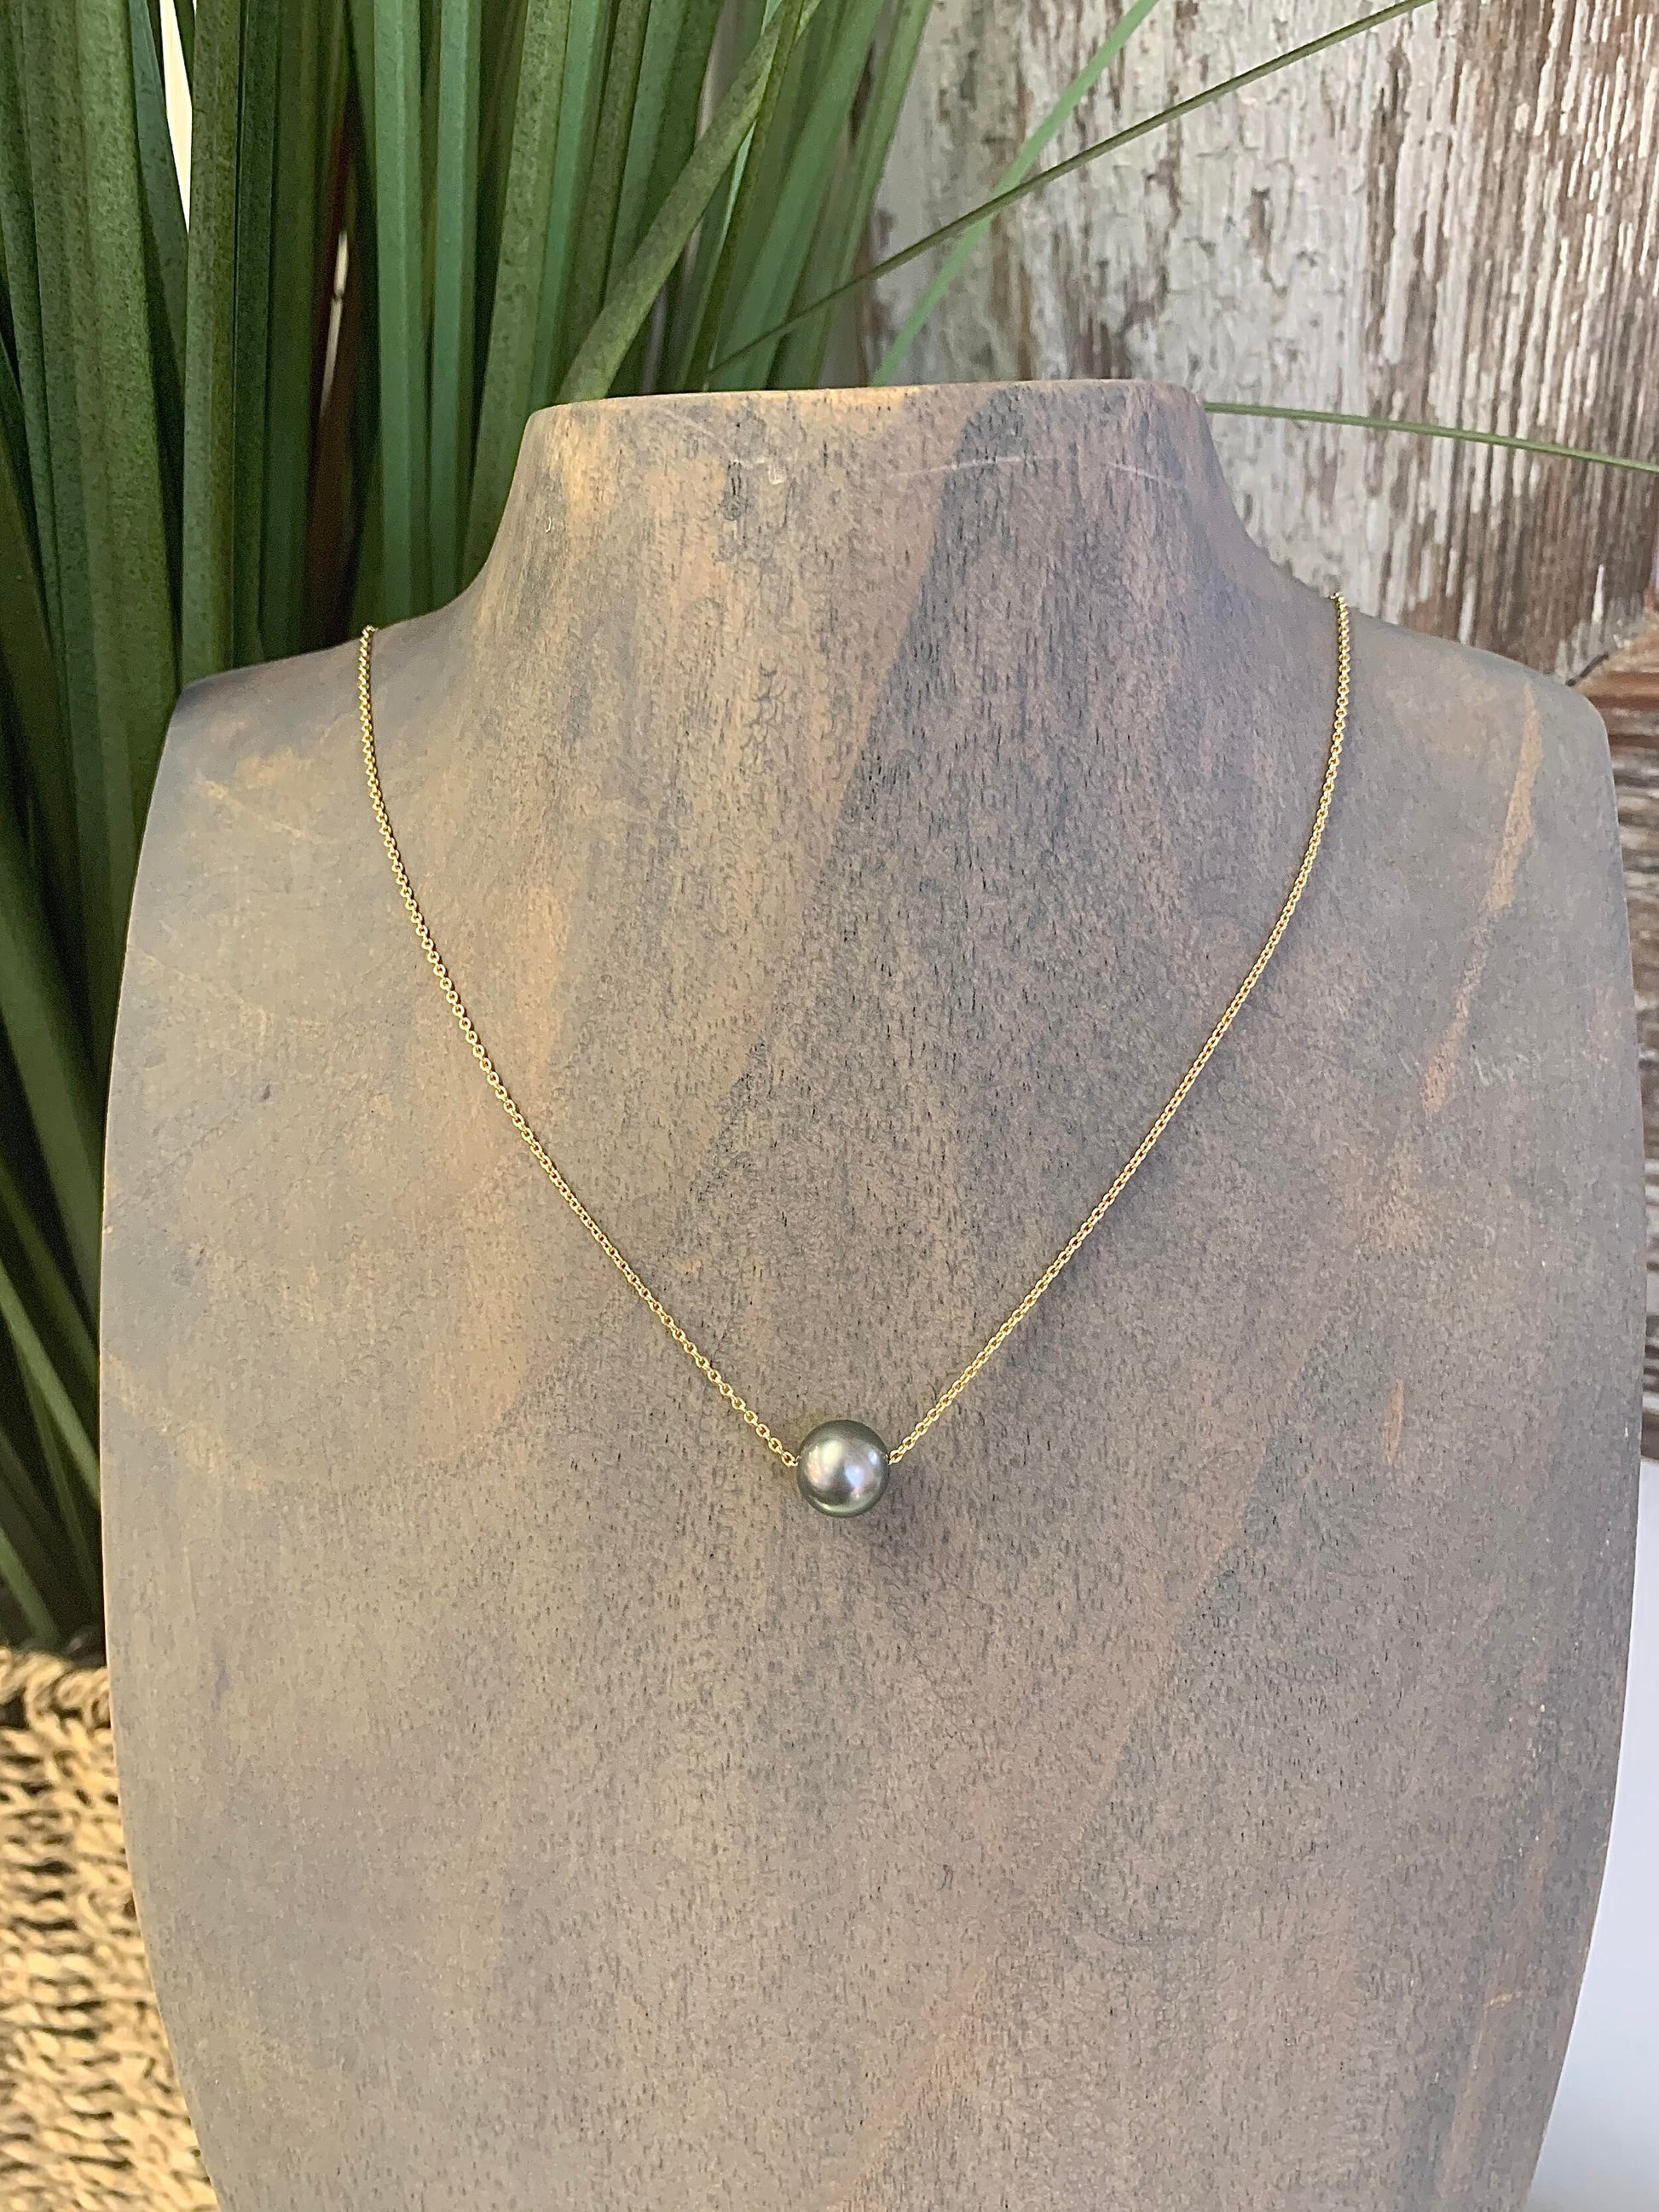 Tahitian Black Pearl Necklace with 14K yellow gold chain by Jewel in the Sea Nantucket